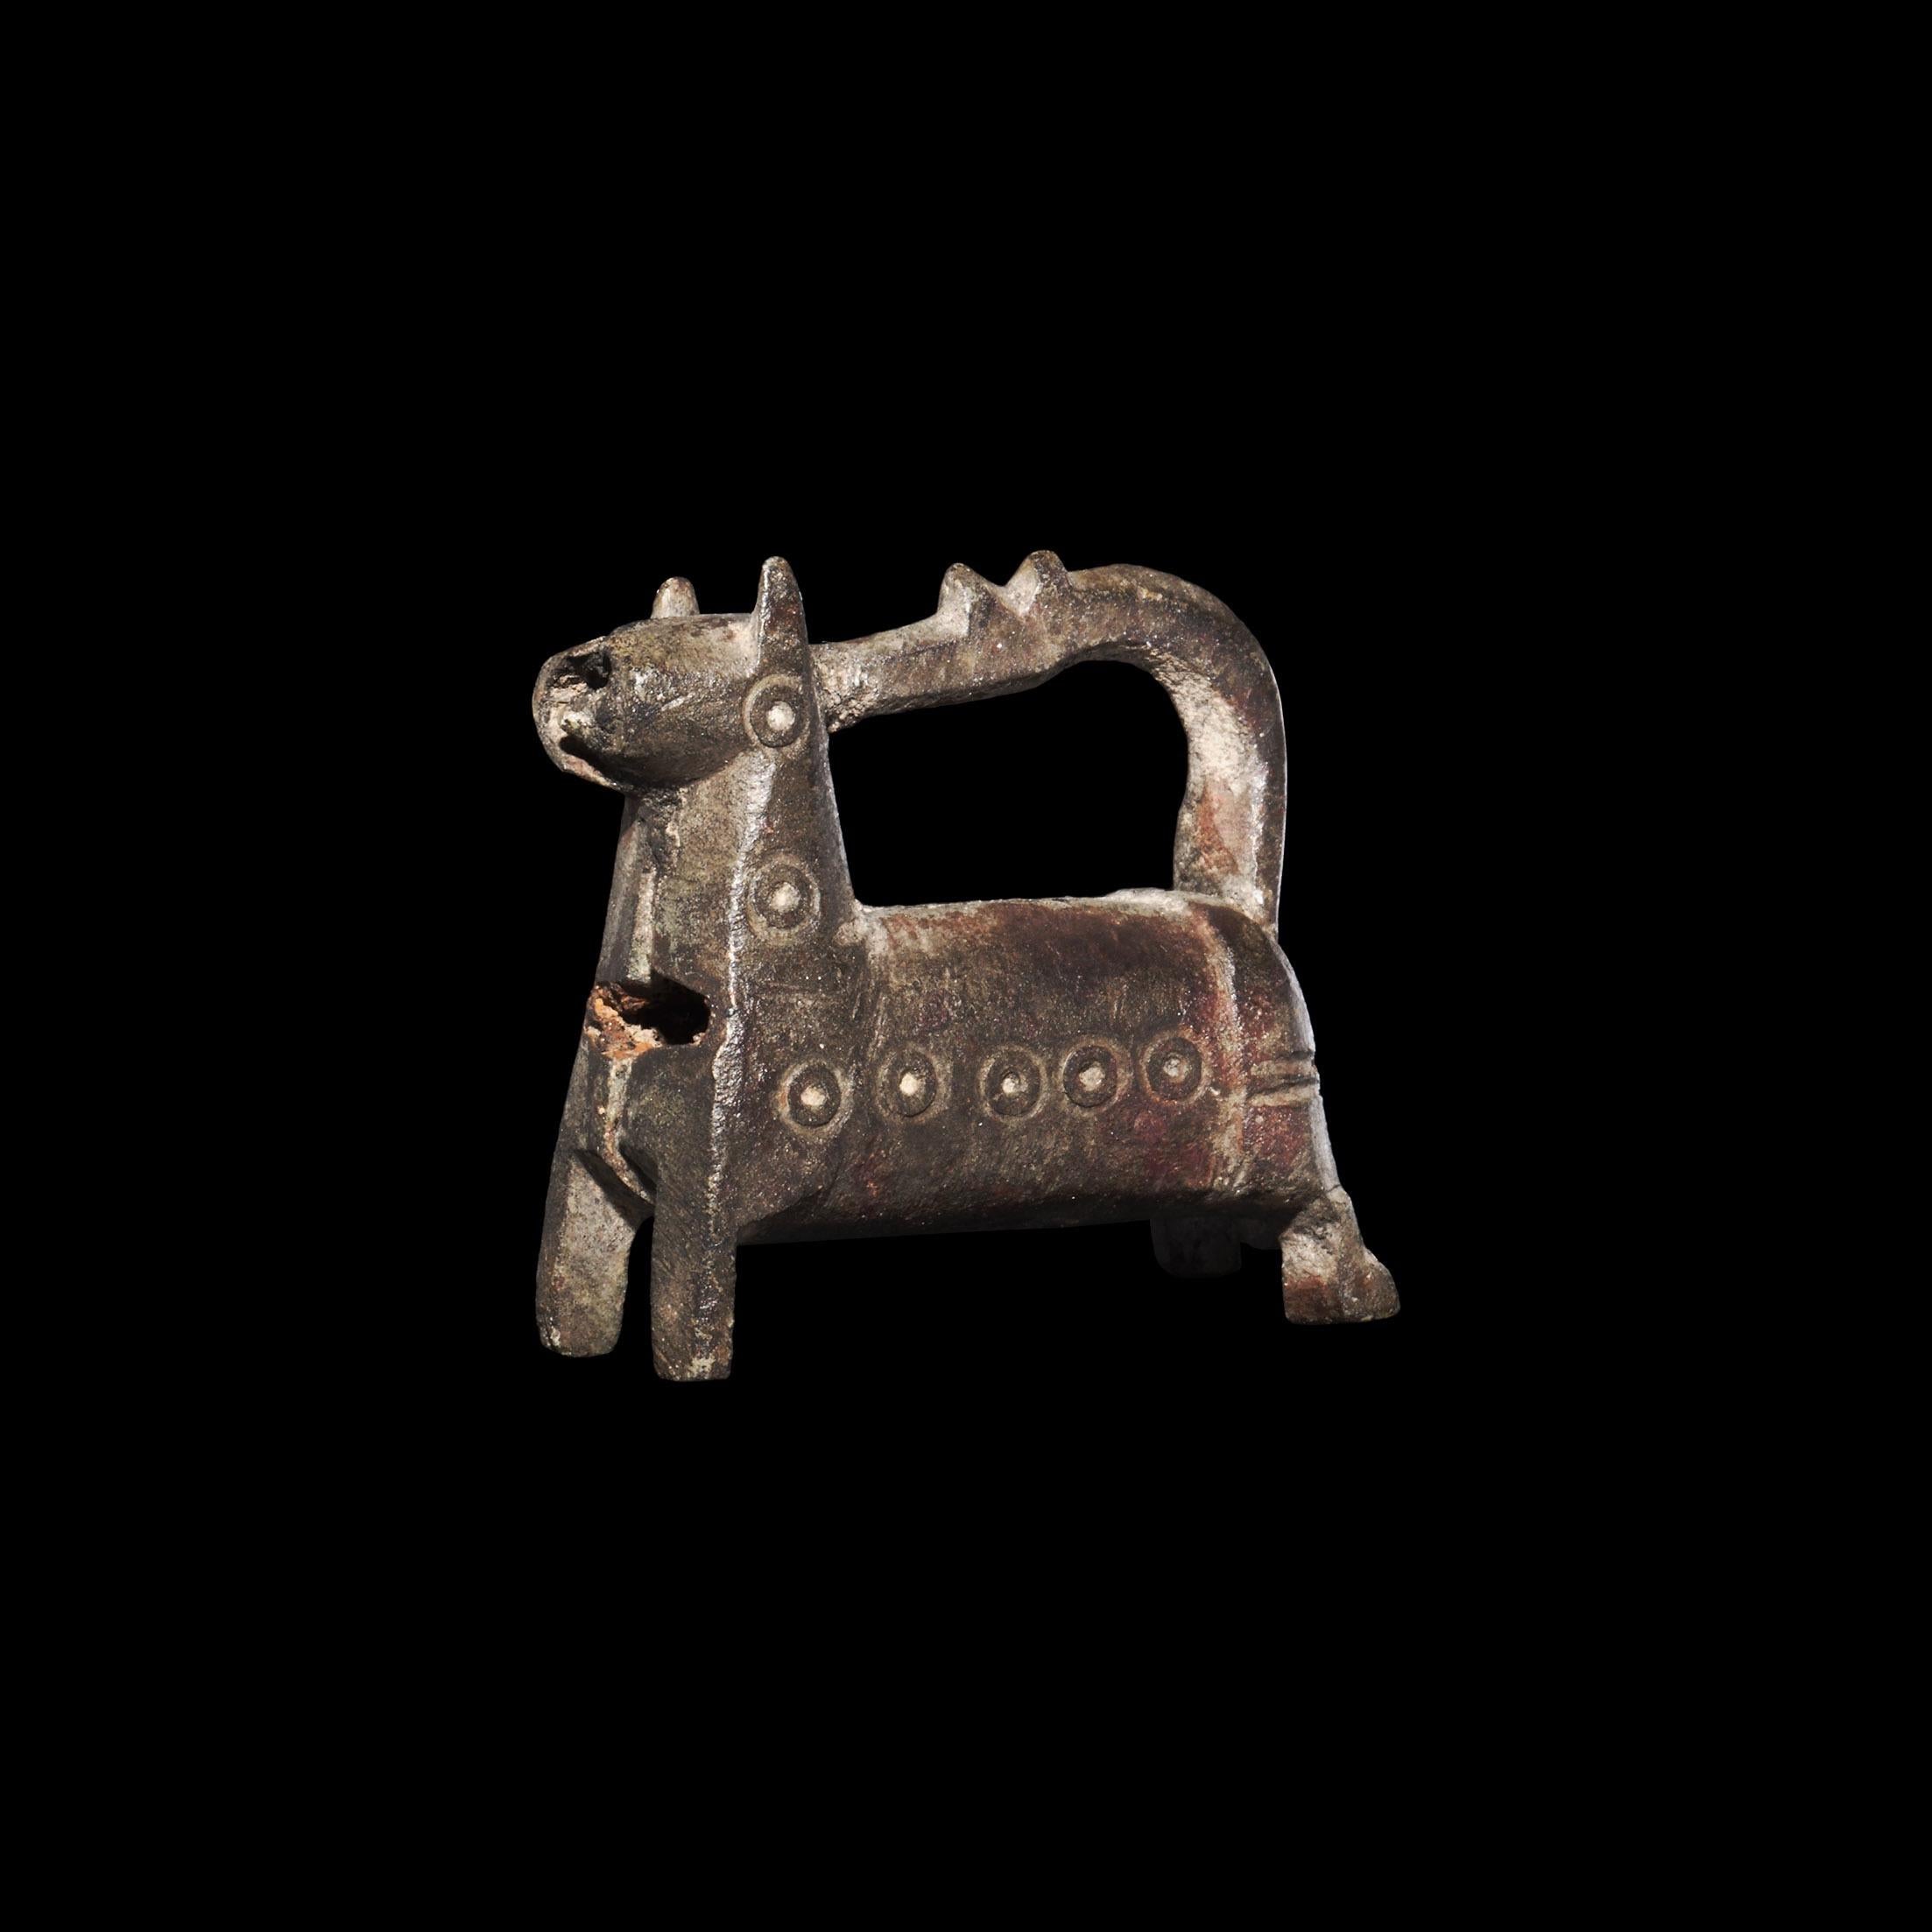 Hand-Crafted Byzantine Rare Standing Horse Barrel Lock, Fine Condition, 8th-9th C AD